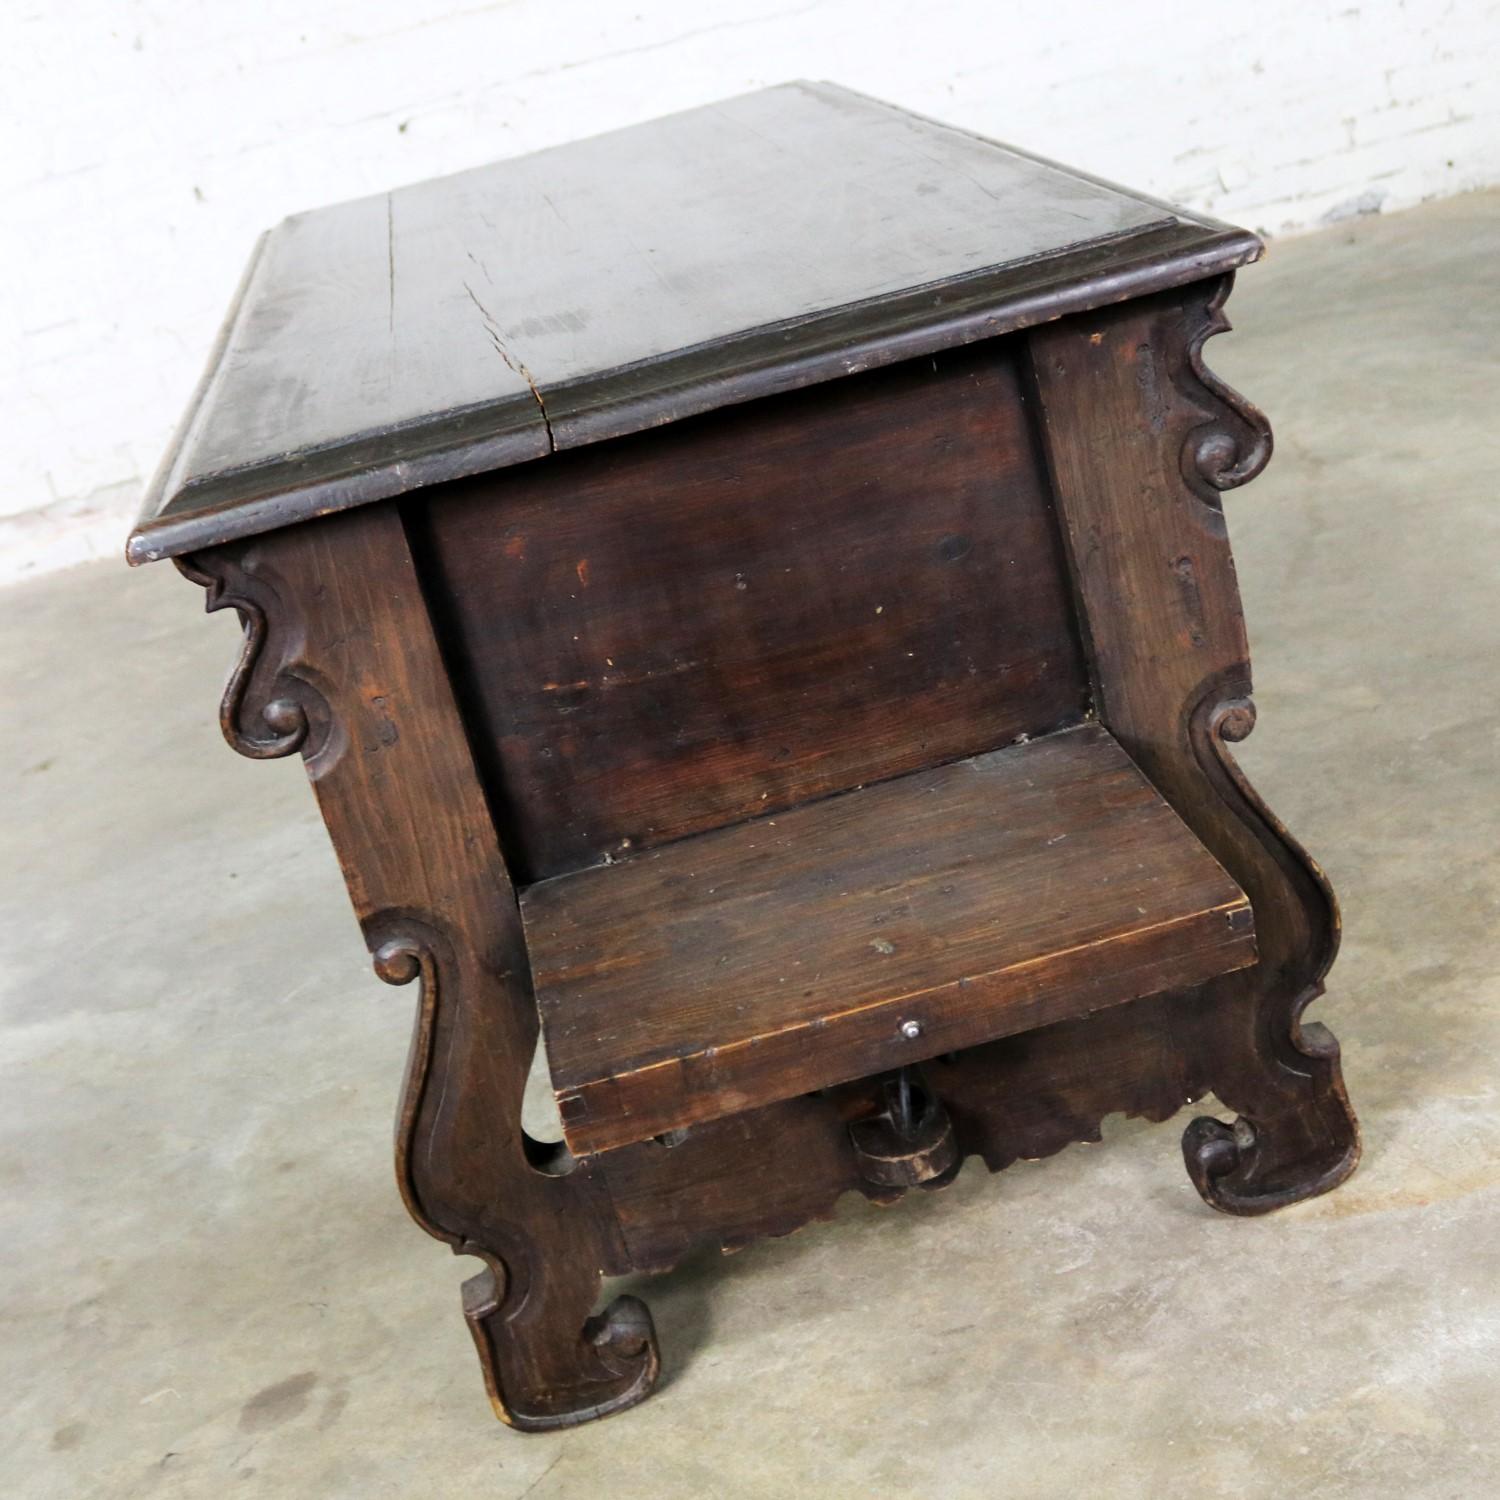 Spanish Revival Style Desk with Handwrought Hardware by Artes De Mexico 1